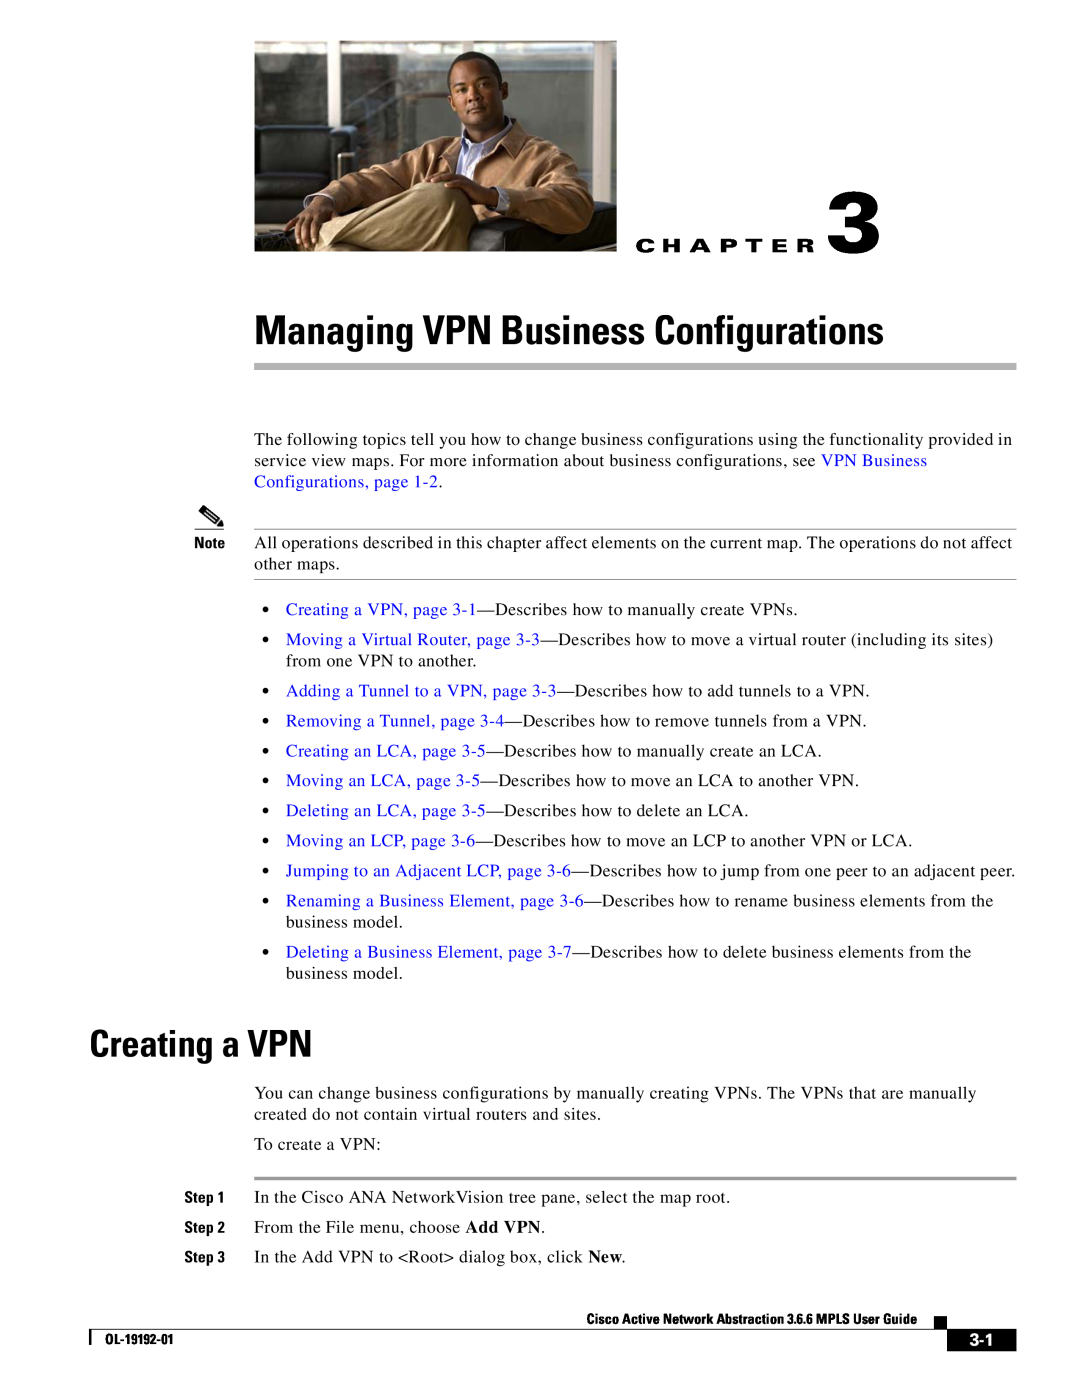 Cisco Systems 3.6.6 manual Managing VPN Business Configurations, Creating a VPN, C H A P T E R 